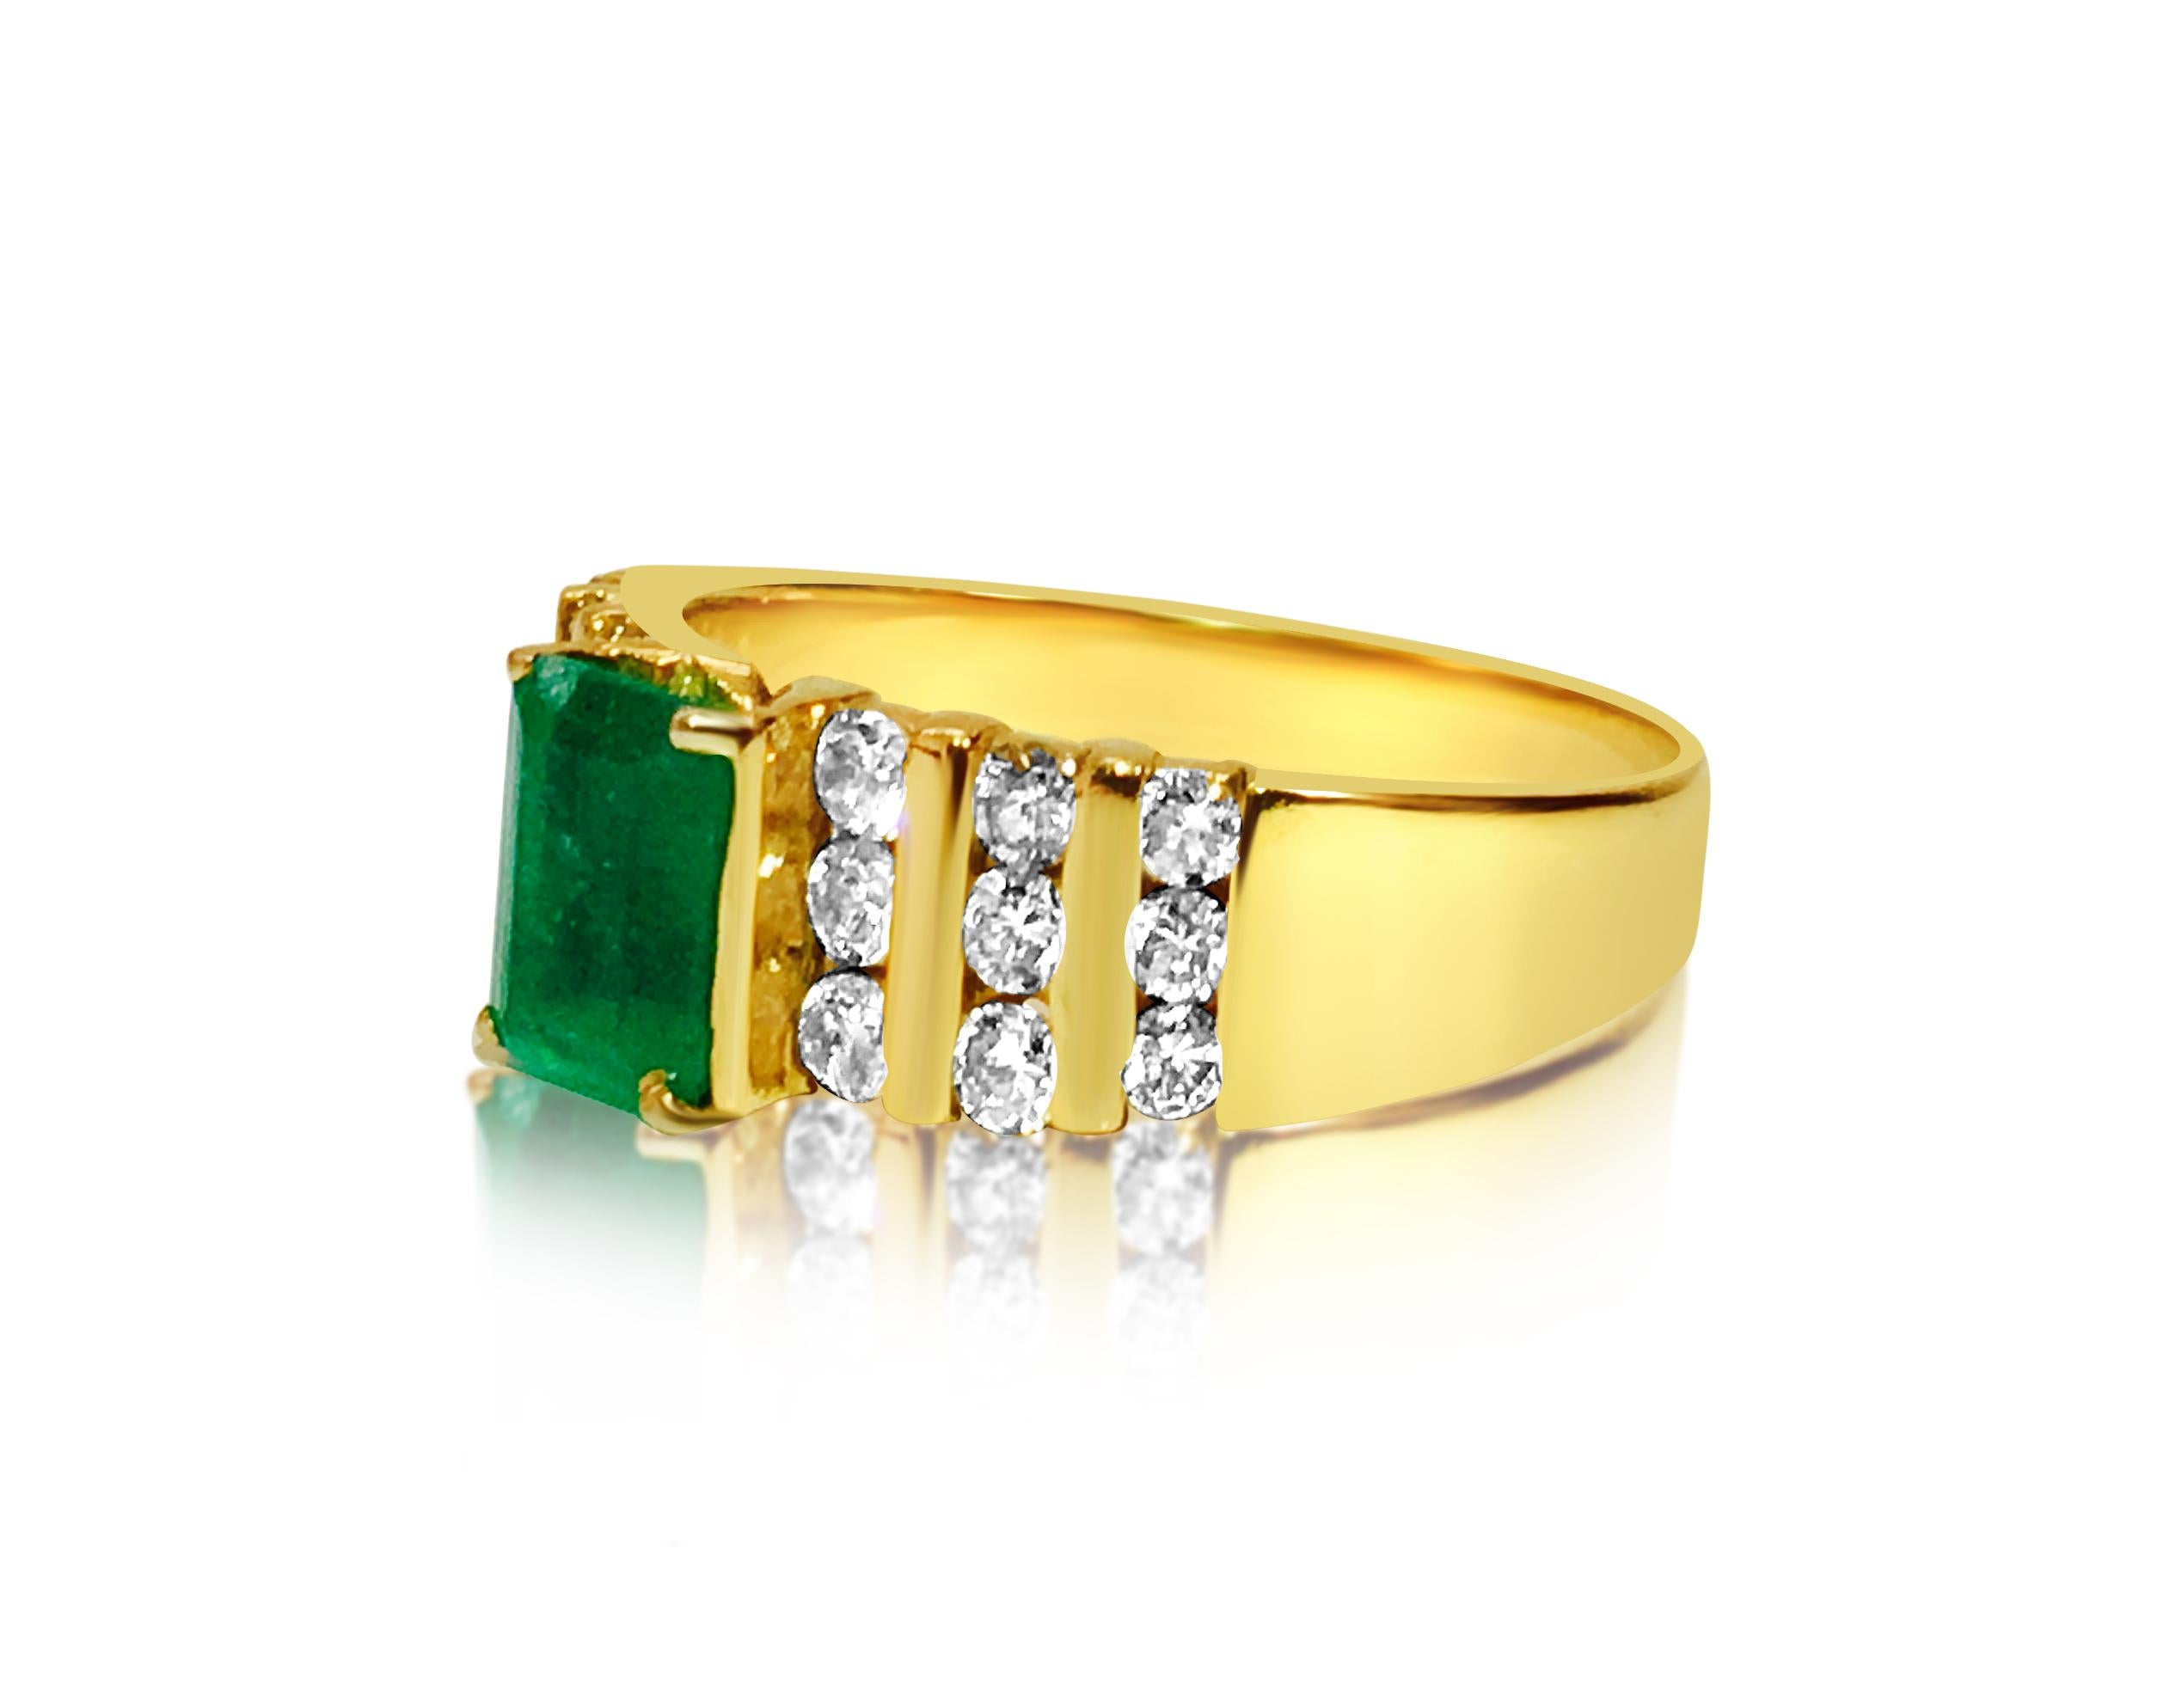 Crafted from luxurious 14k yellow gold, this exquisite ring features a total of 0.60 carats of round brilliant cut diamonds, boasting SI clarity and G color, set elegantly in a channel setting. At its center shines a magnificent 2.10 carat emerald,